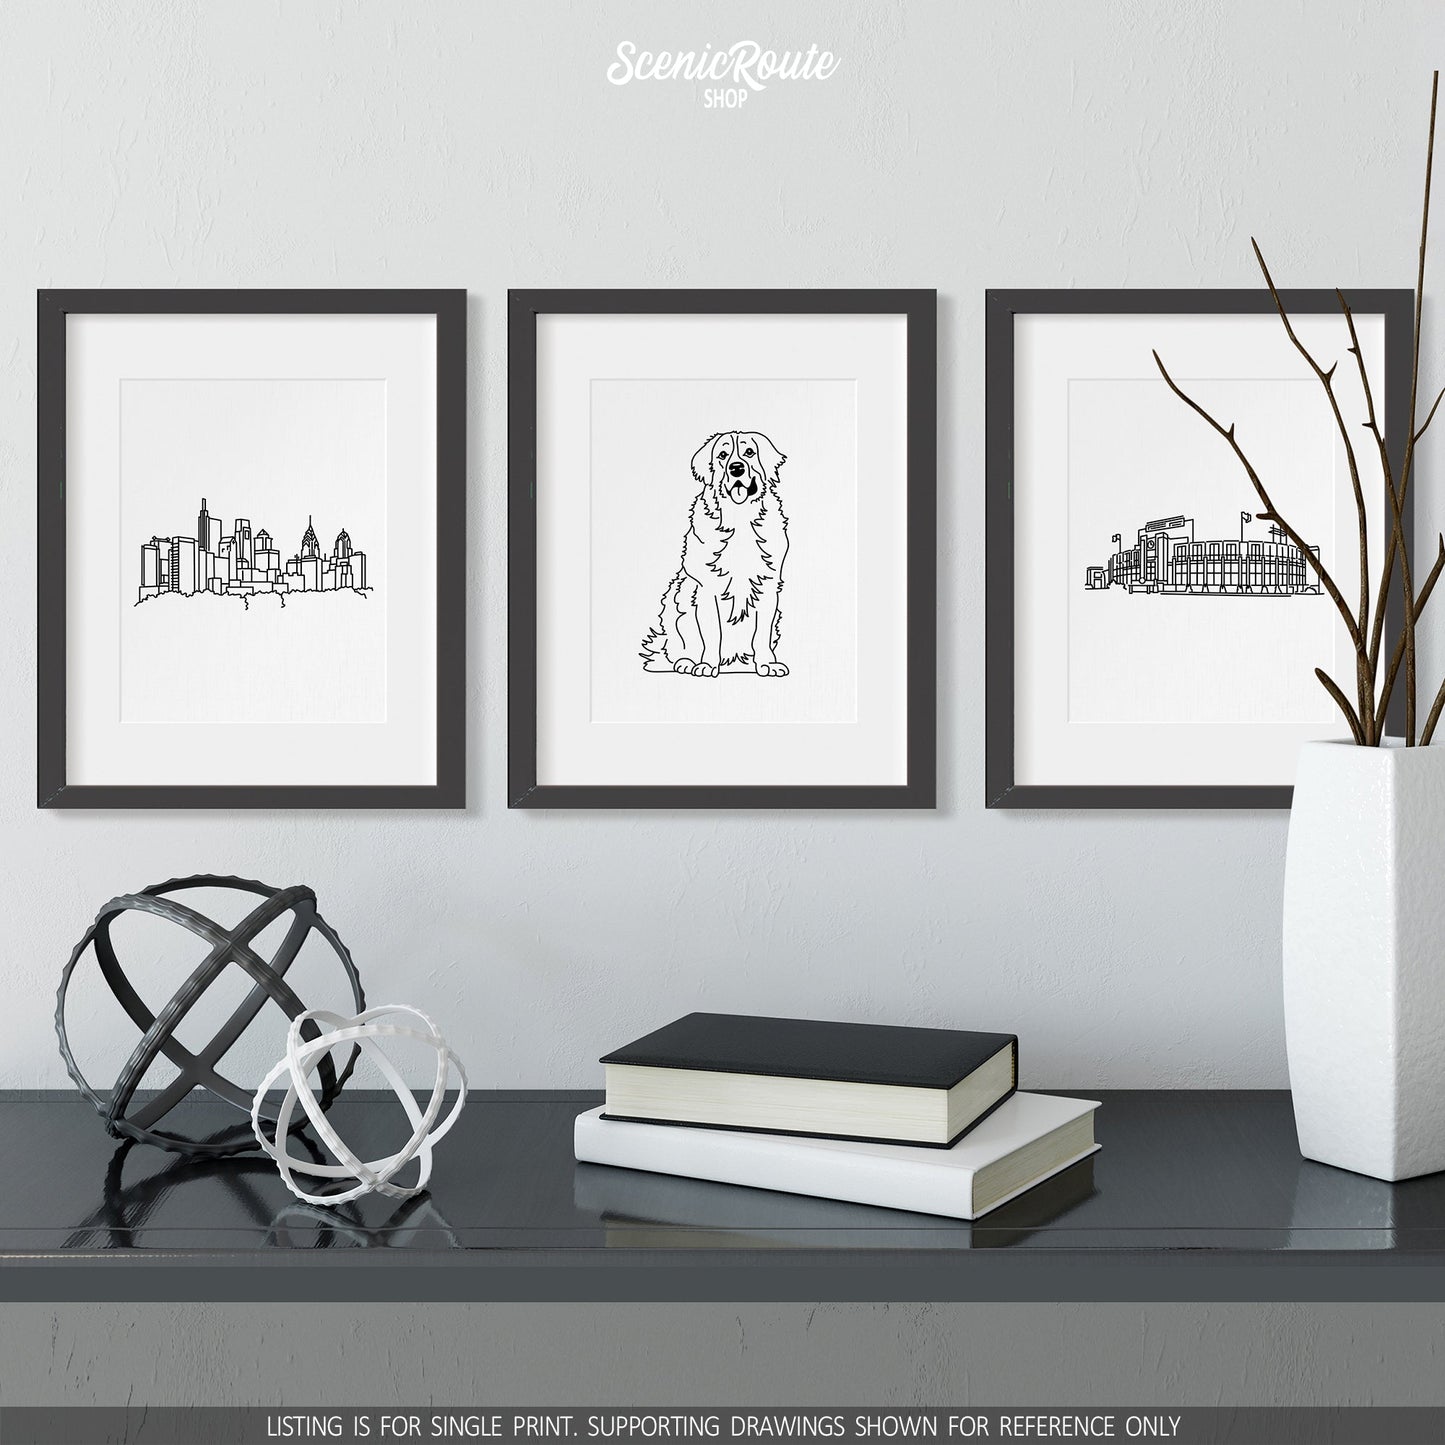 A group of three framed drawings on a white wall above a black table with books and a vase. The line art drawings include the Philadelphia Skyline, a Bernese Mountain Dog, and Lambeau Field